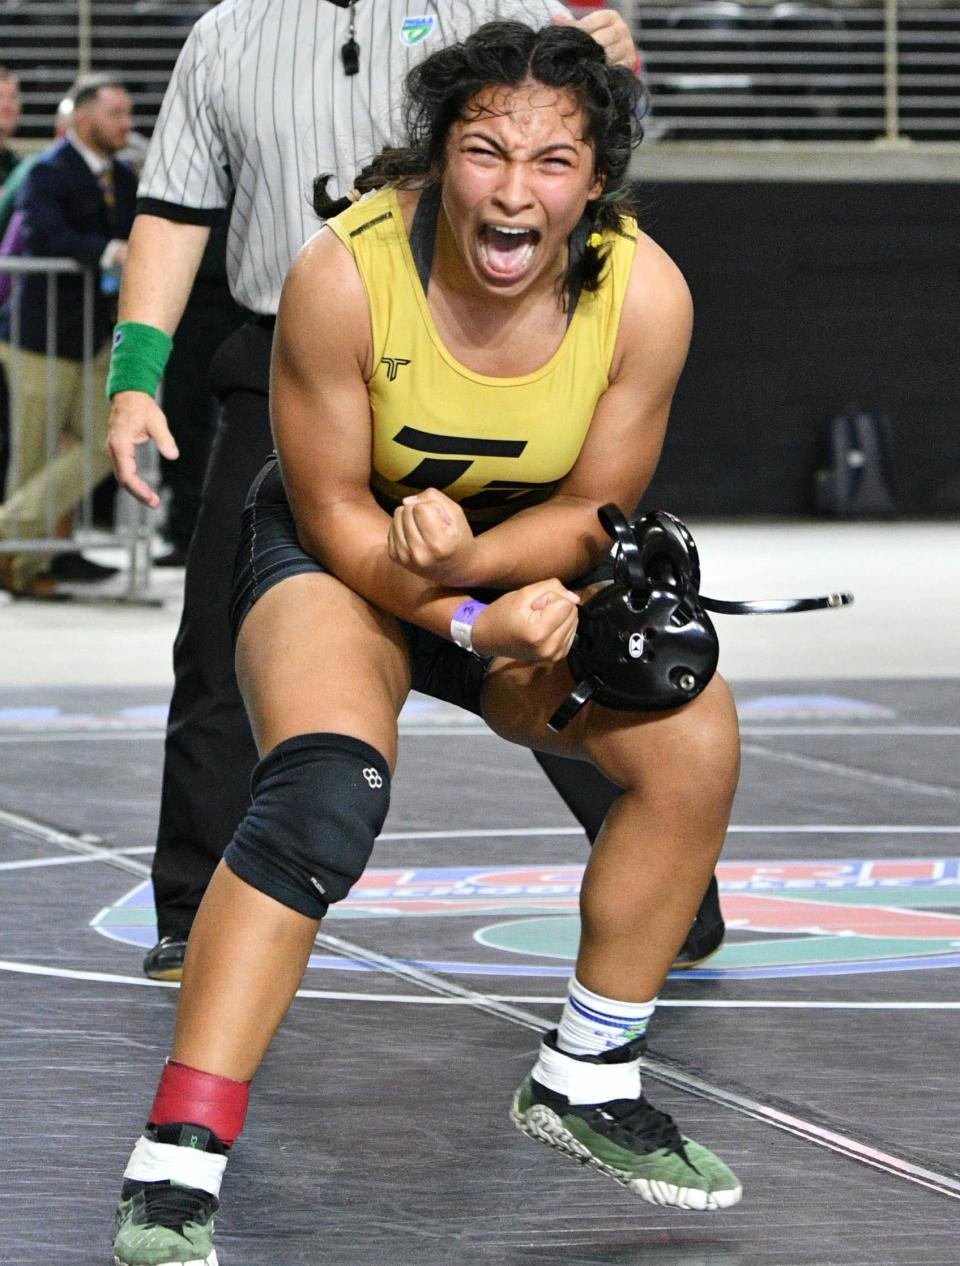 Gabriella Perez of Treasure Coast celebrates her victory over Tydaisa Mack of North Miami during the FHSAA State Wrestling Championships at Silver Spurs Arena in Kissimmee. Craig Bailey/FLORIDA TODAY via USA TODAY NETWORK